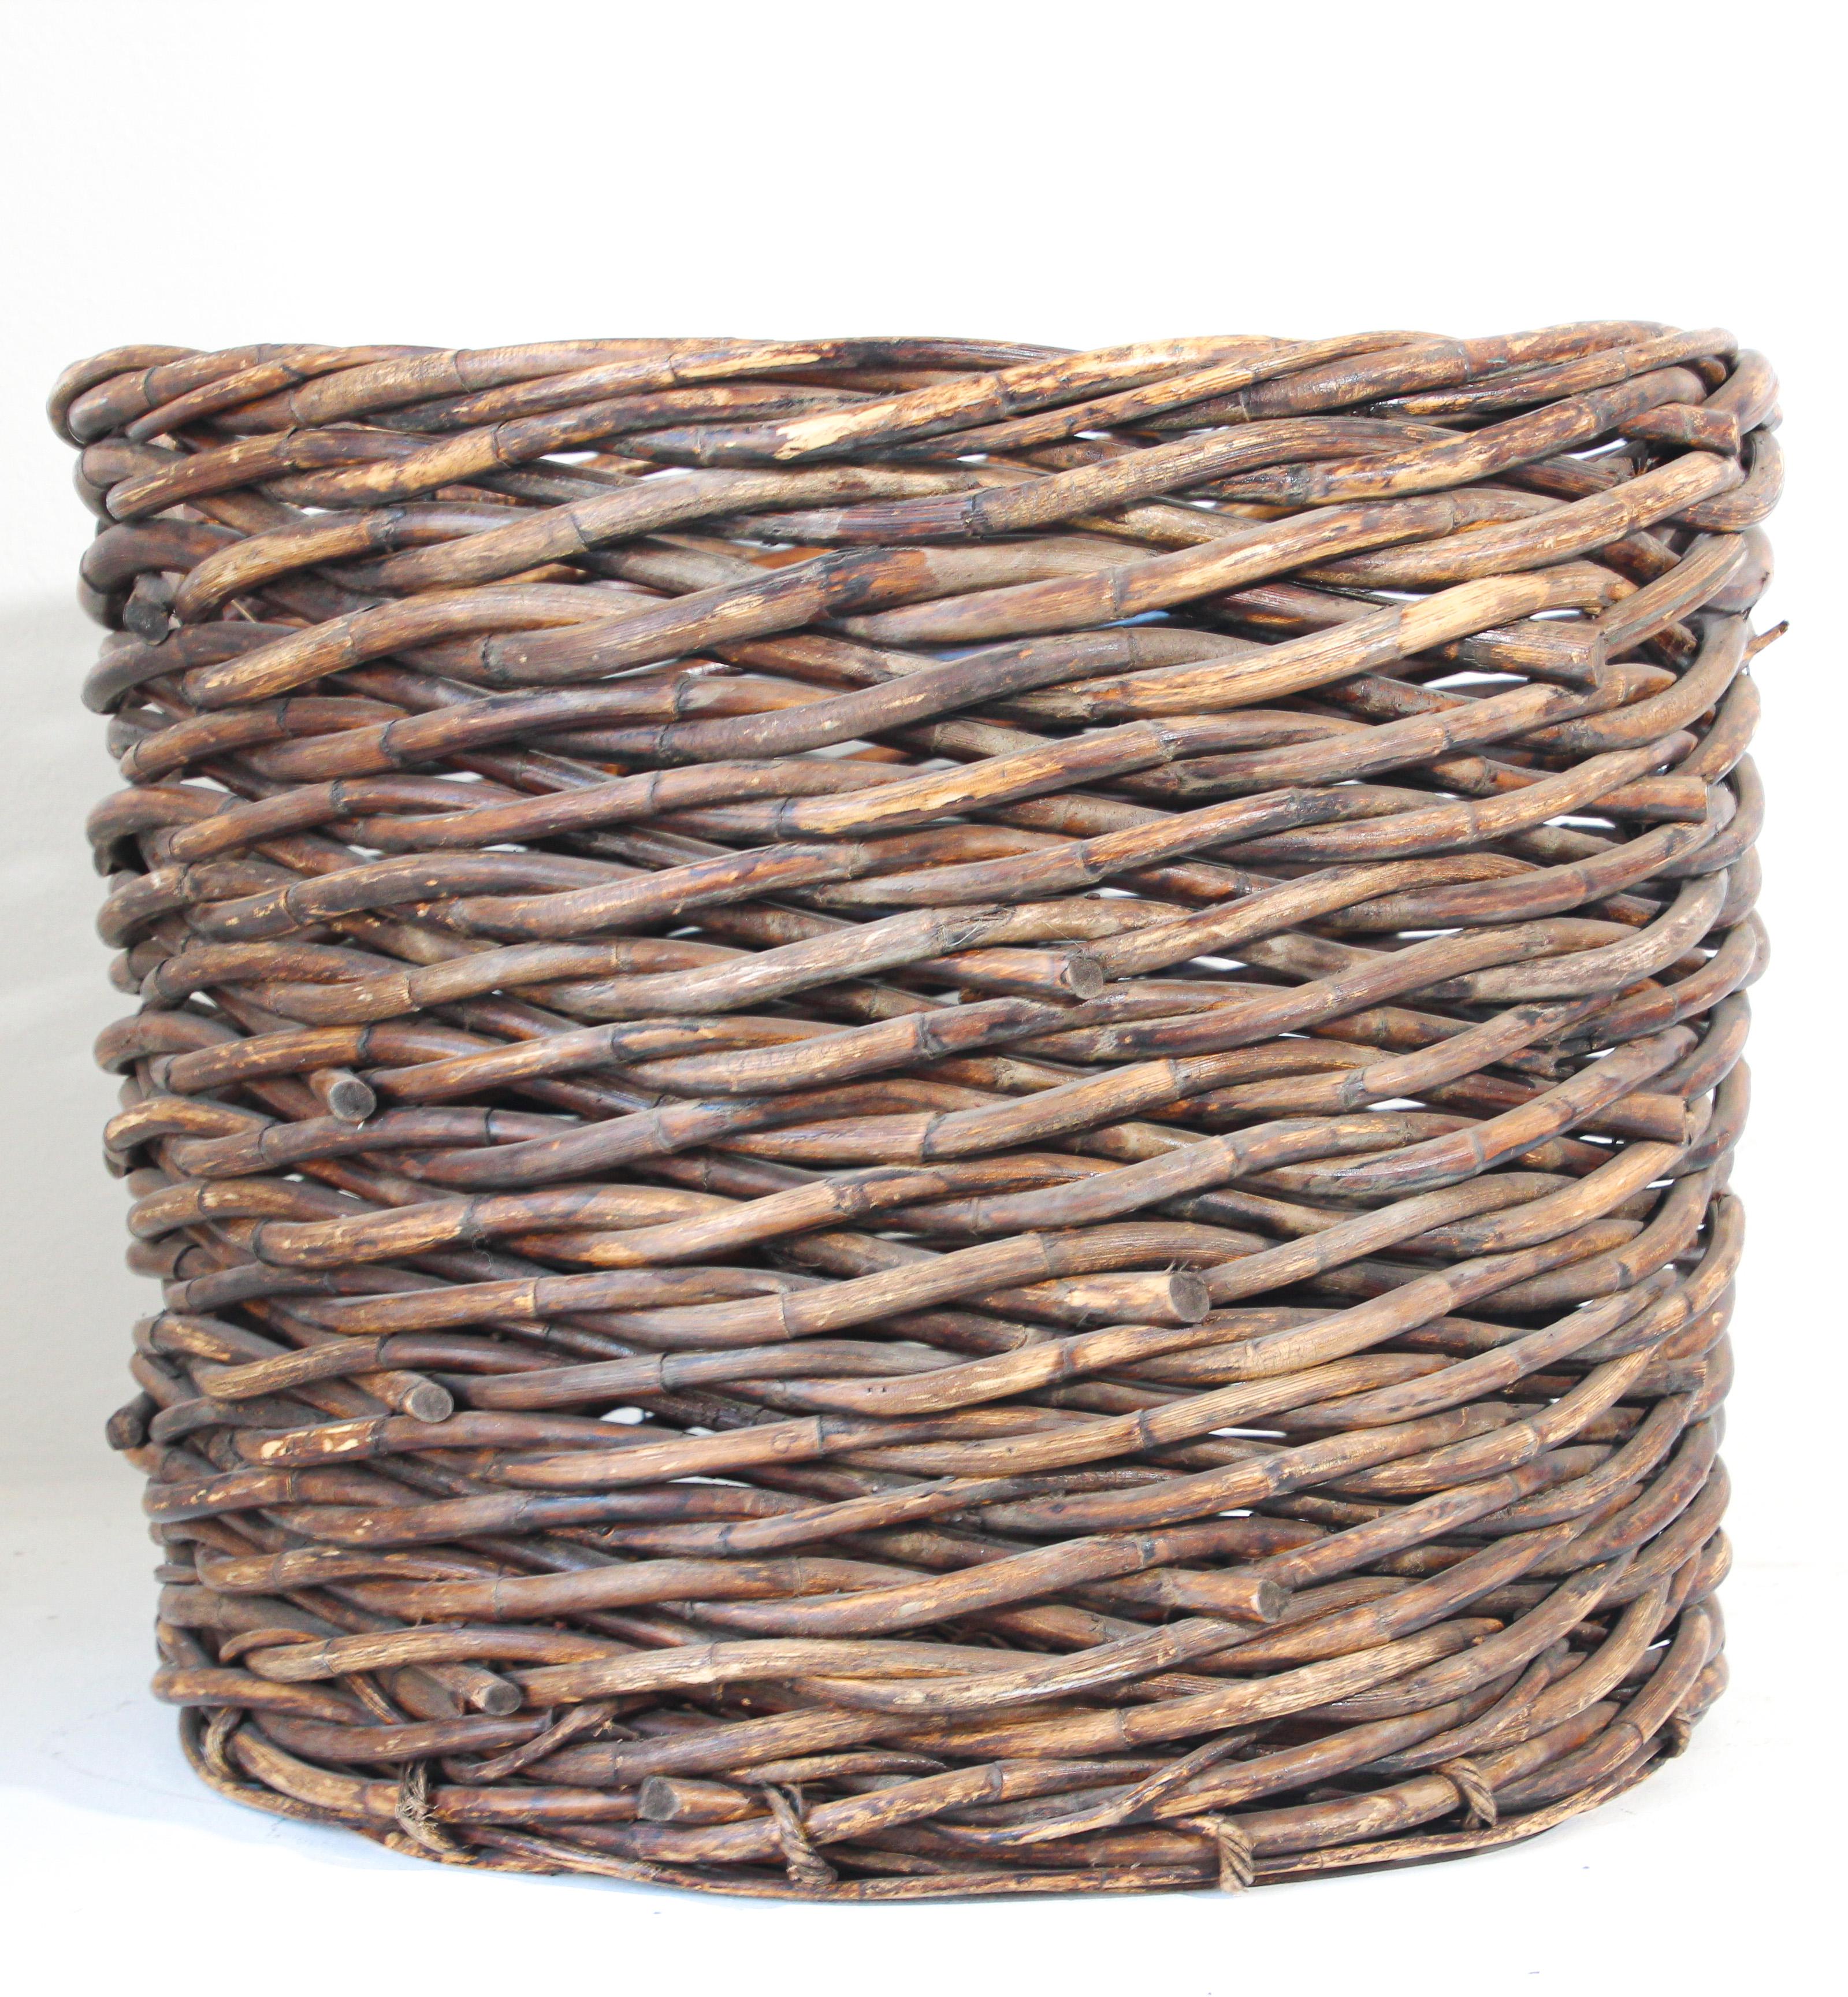 Large oversized French vineyard harvest wicker basket.
Classic oversized French wicker basket.
Handmade and Handwoven of a thick wicker in superb condition and a lovely warm patina. 
Art and crafts rustic style for your country barn house.
Great